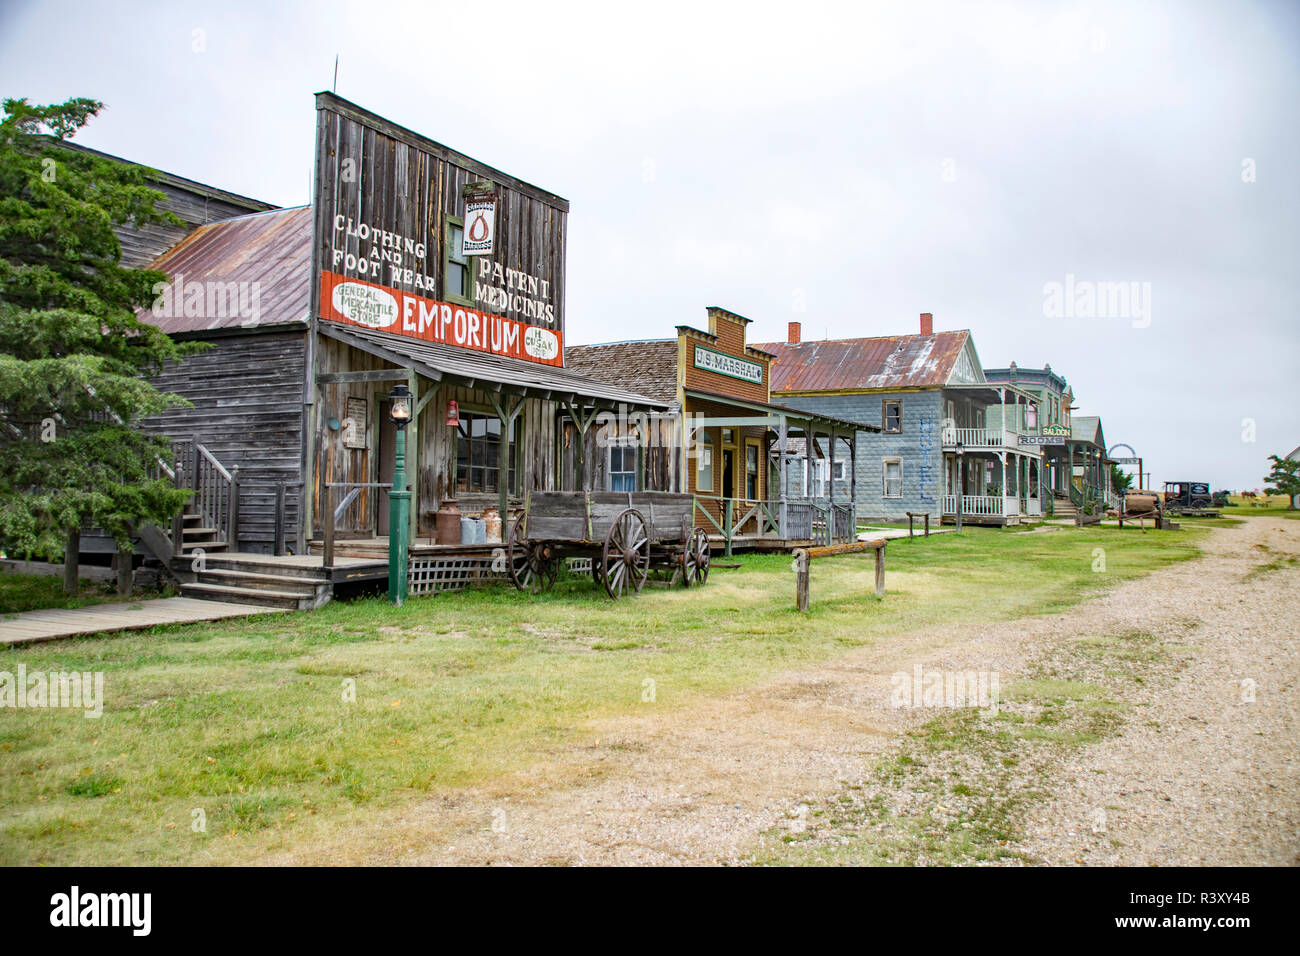 A view of 1880 Town in Souht Dakota, movie set for Dances With Wolves. Stock Photo